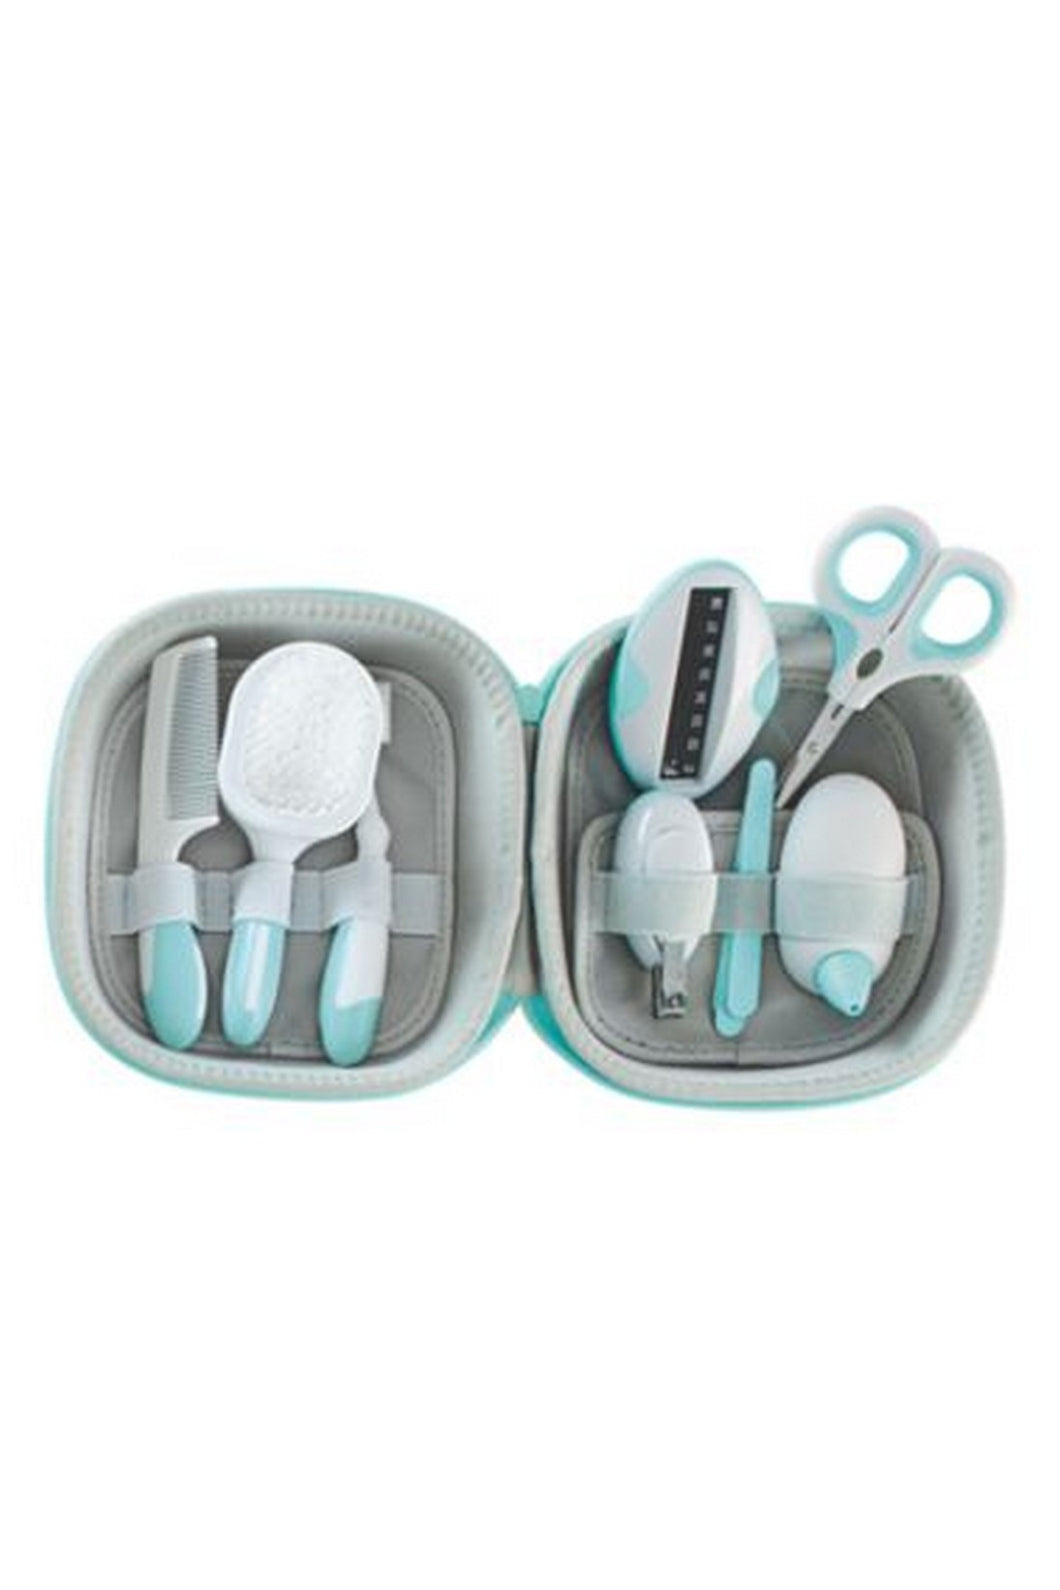 Mothercare Deluxe Care Set